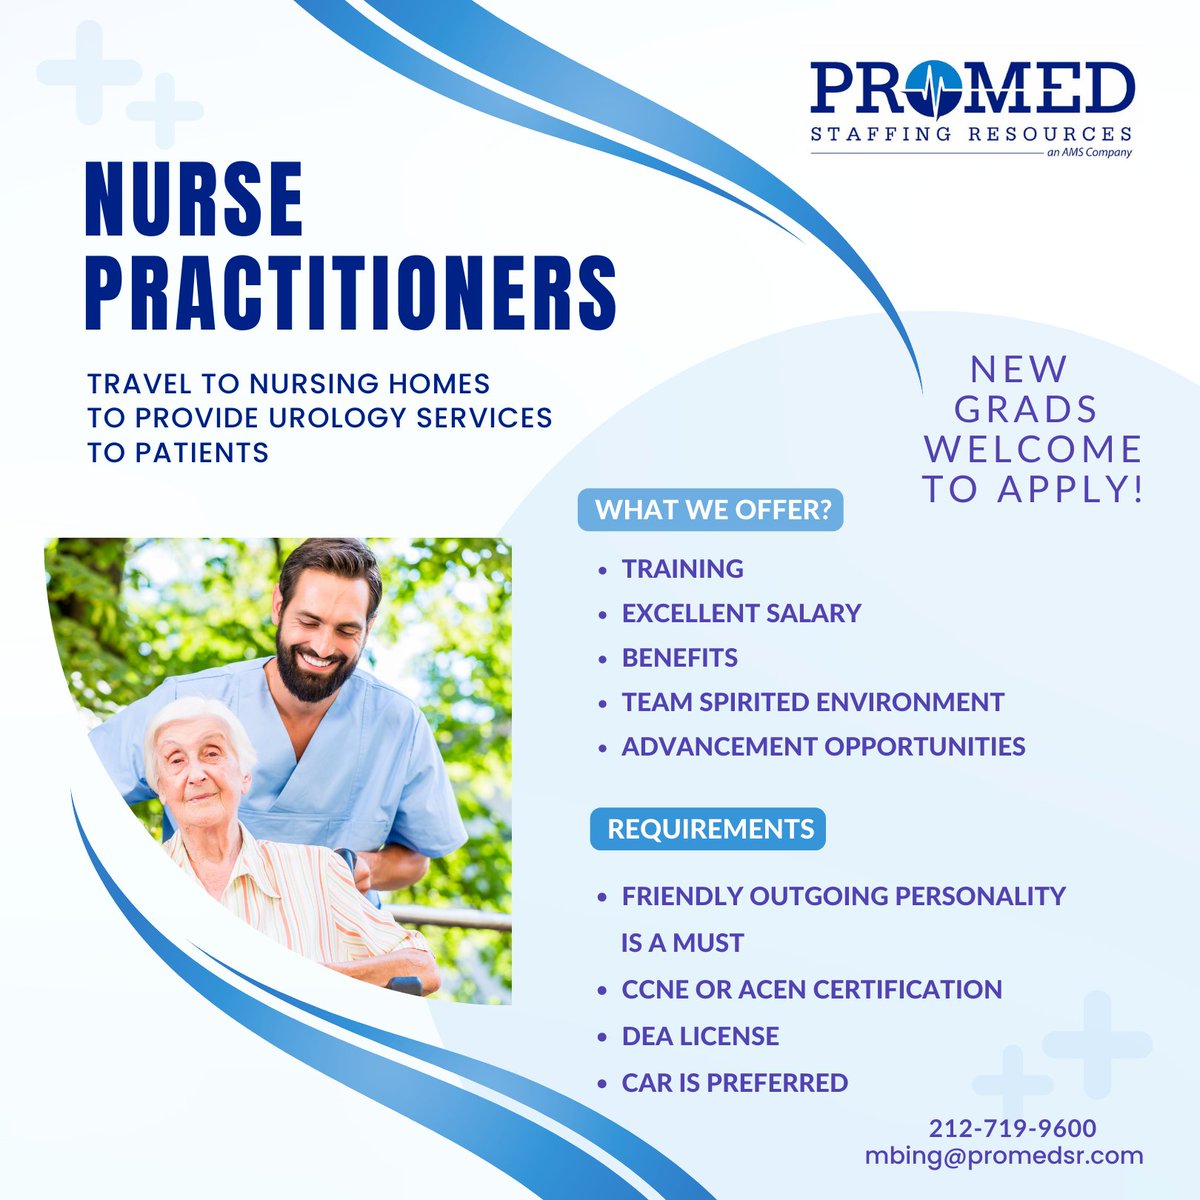 We are seeking an outgoing and personable #nursepractitioner to join the #team one of our key clients, ProMD, a fast-growing #urologyservices company. If you are interested in this #position, please call Maria Bingeman at (212) 719-9600 Ext. 200 today! 

#bronx #hiring #proemdsr